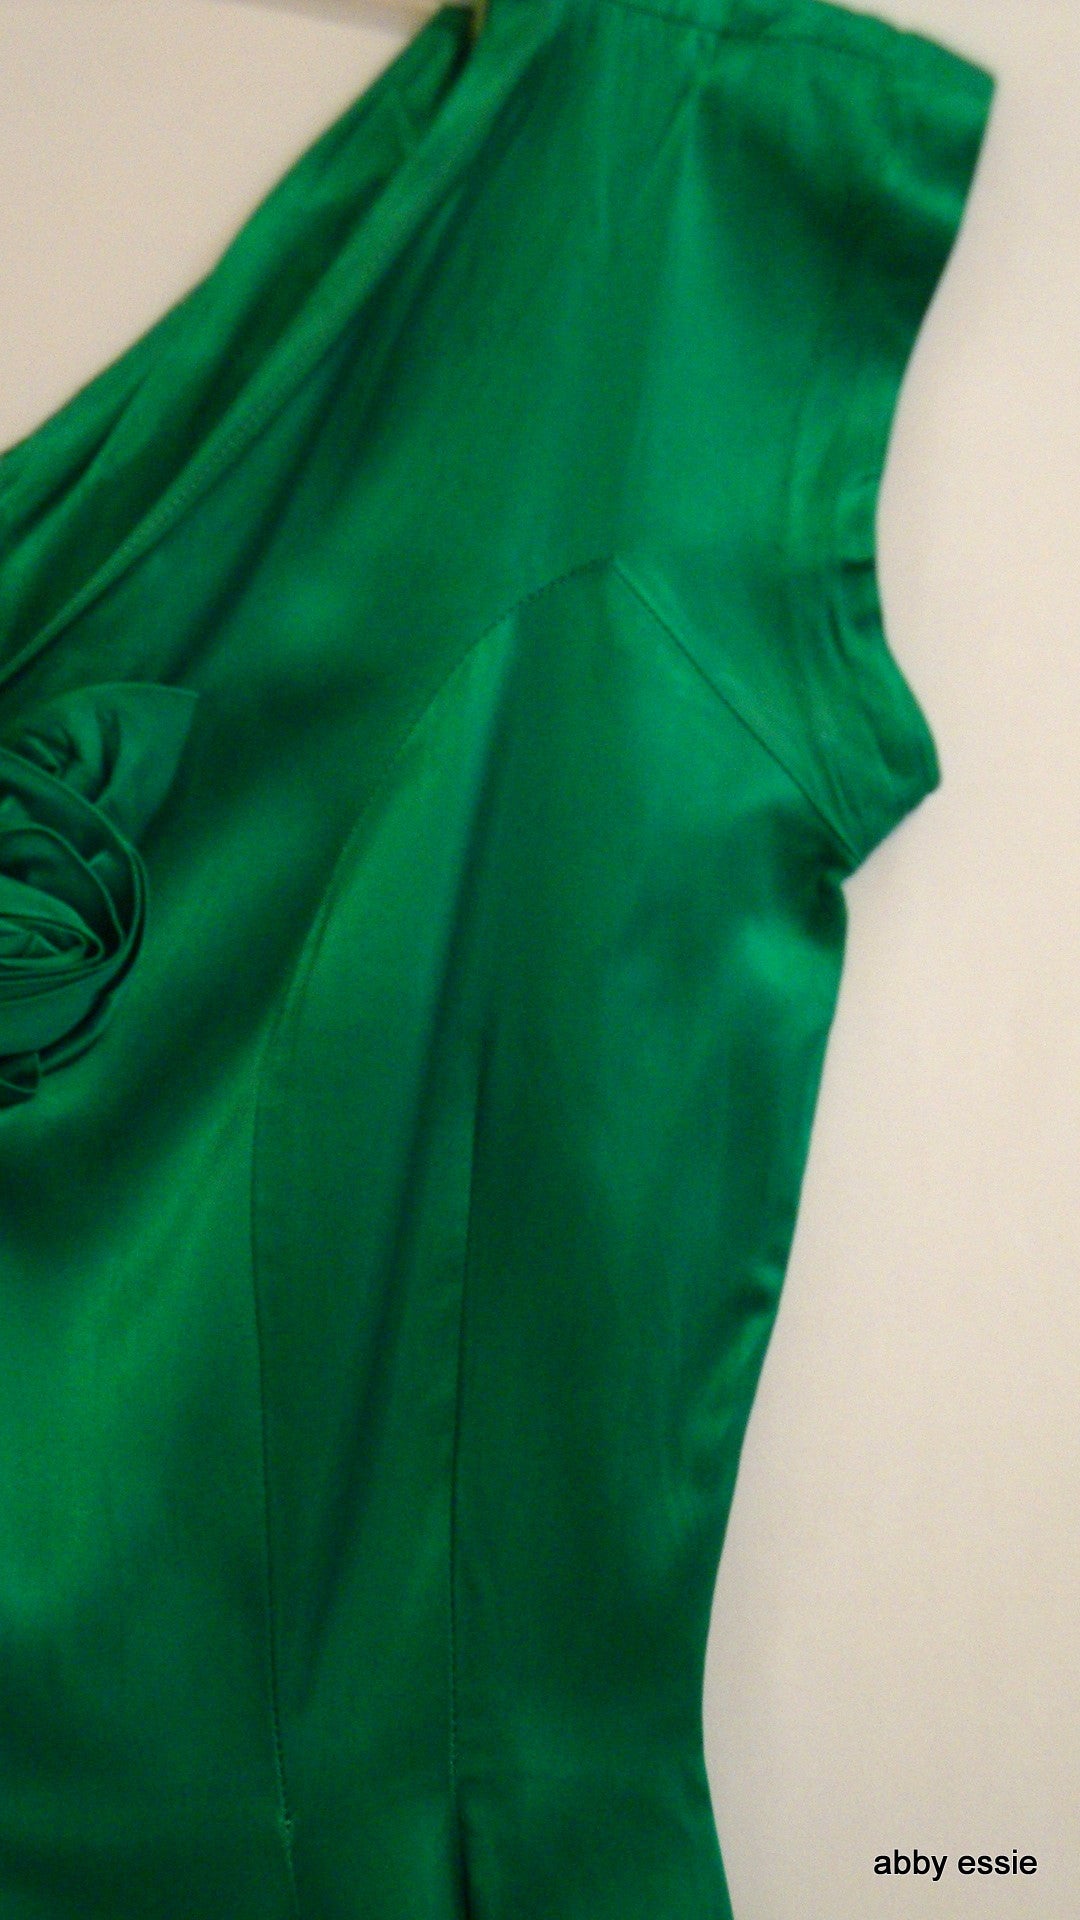 Green Silk 1950s Vintage Party Dress Rosettes